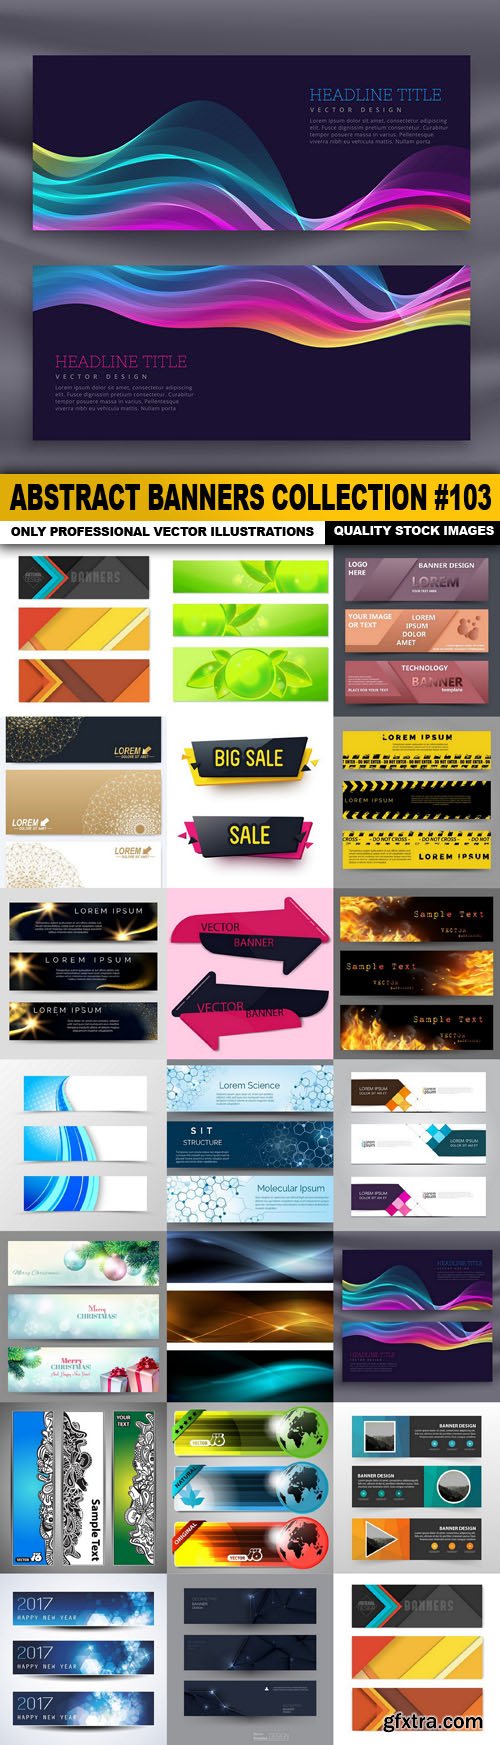 Abstract Banners Collection #103 - 20 Vectors